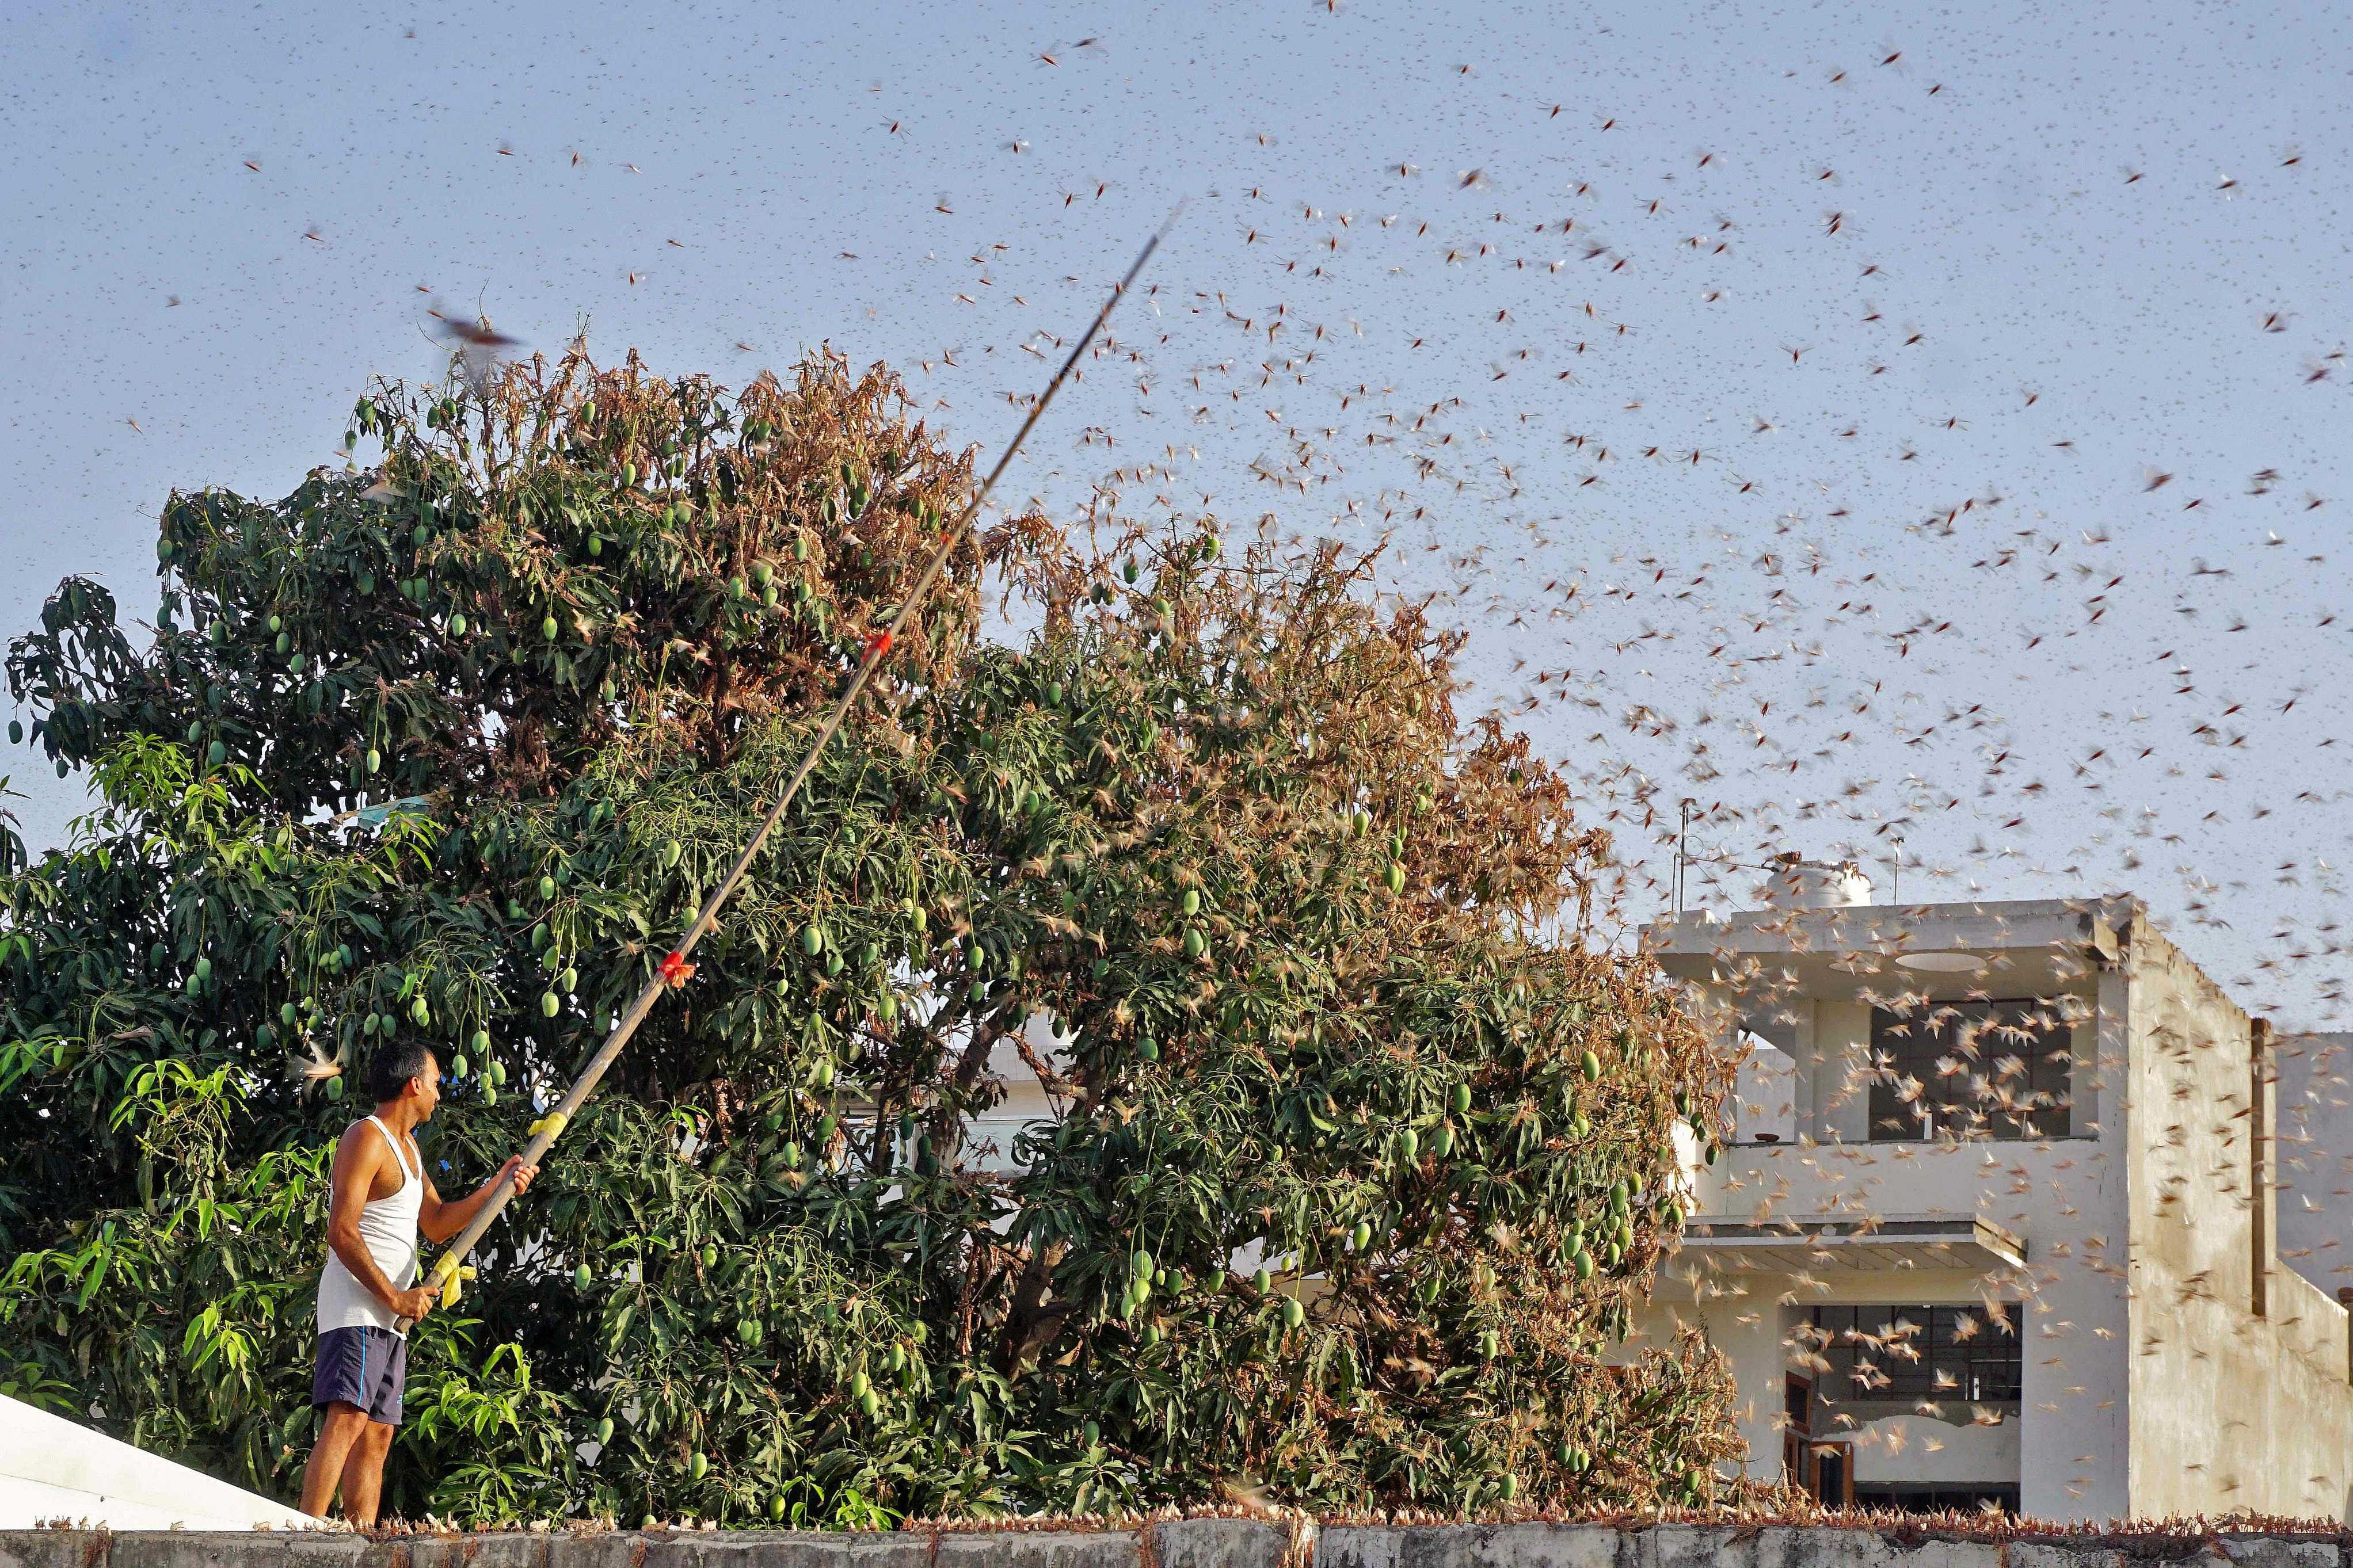 a resident tries to fend off swarms of locusts from a mango tree in a residential area of Jaipur. (AFP photo)